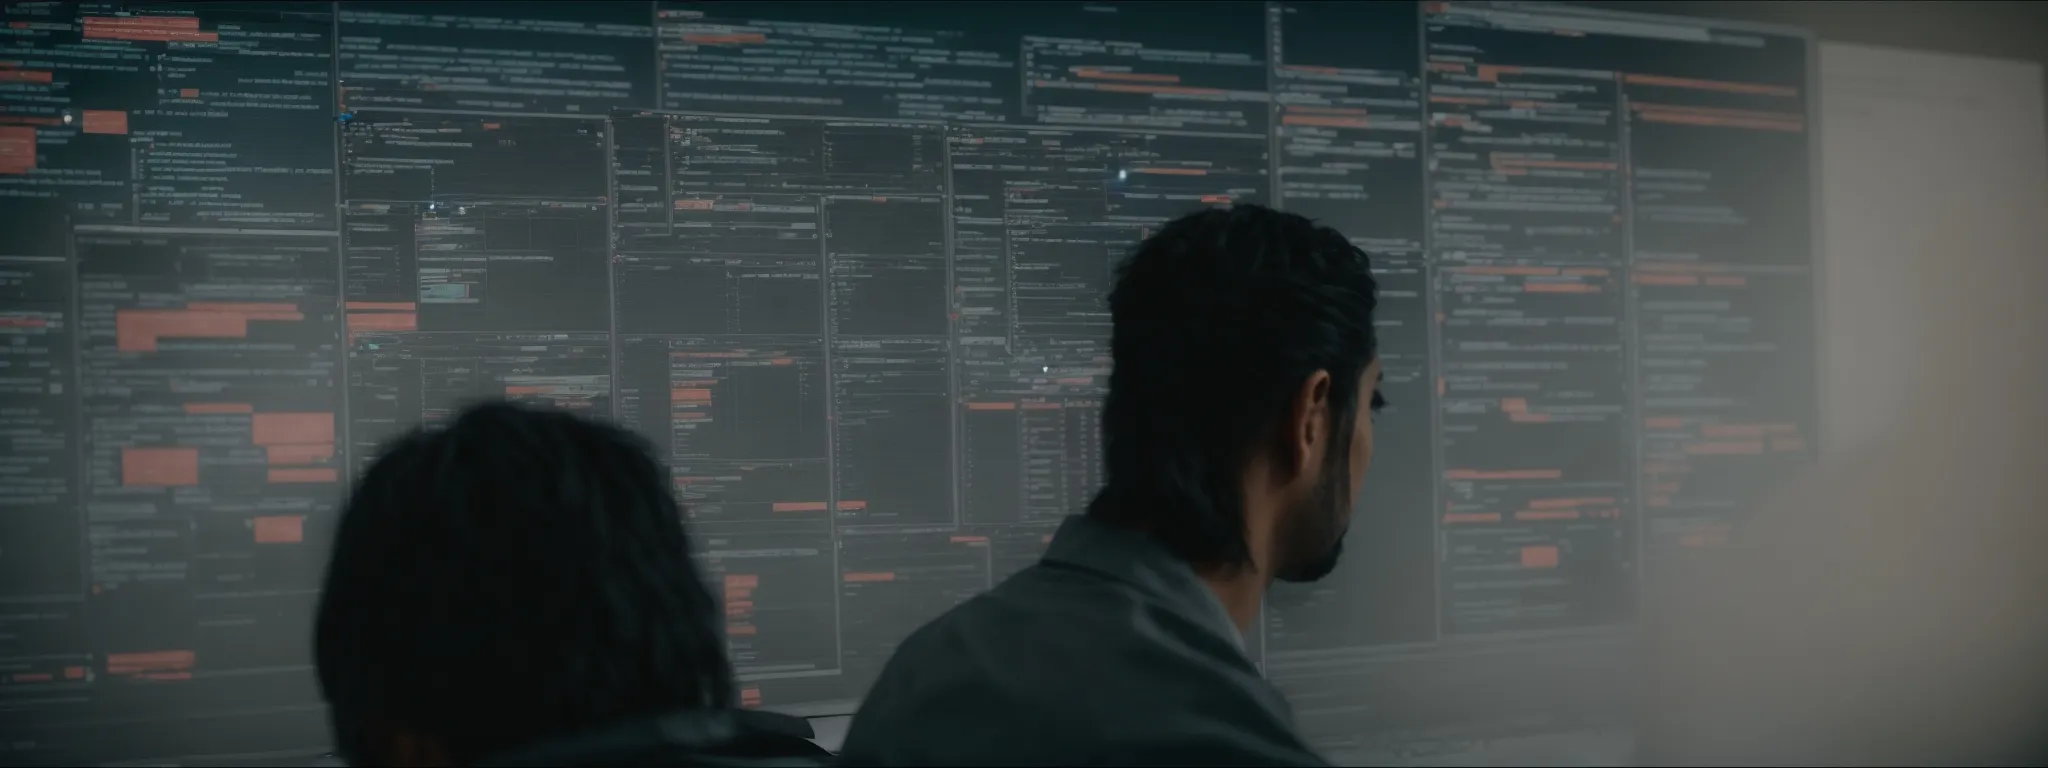 a web developer attentively studies a cascading flowchart on a computer screen, symbolizing content structuring with header tags.